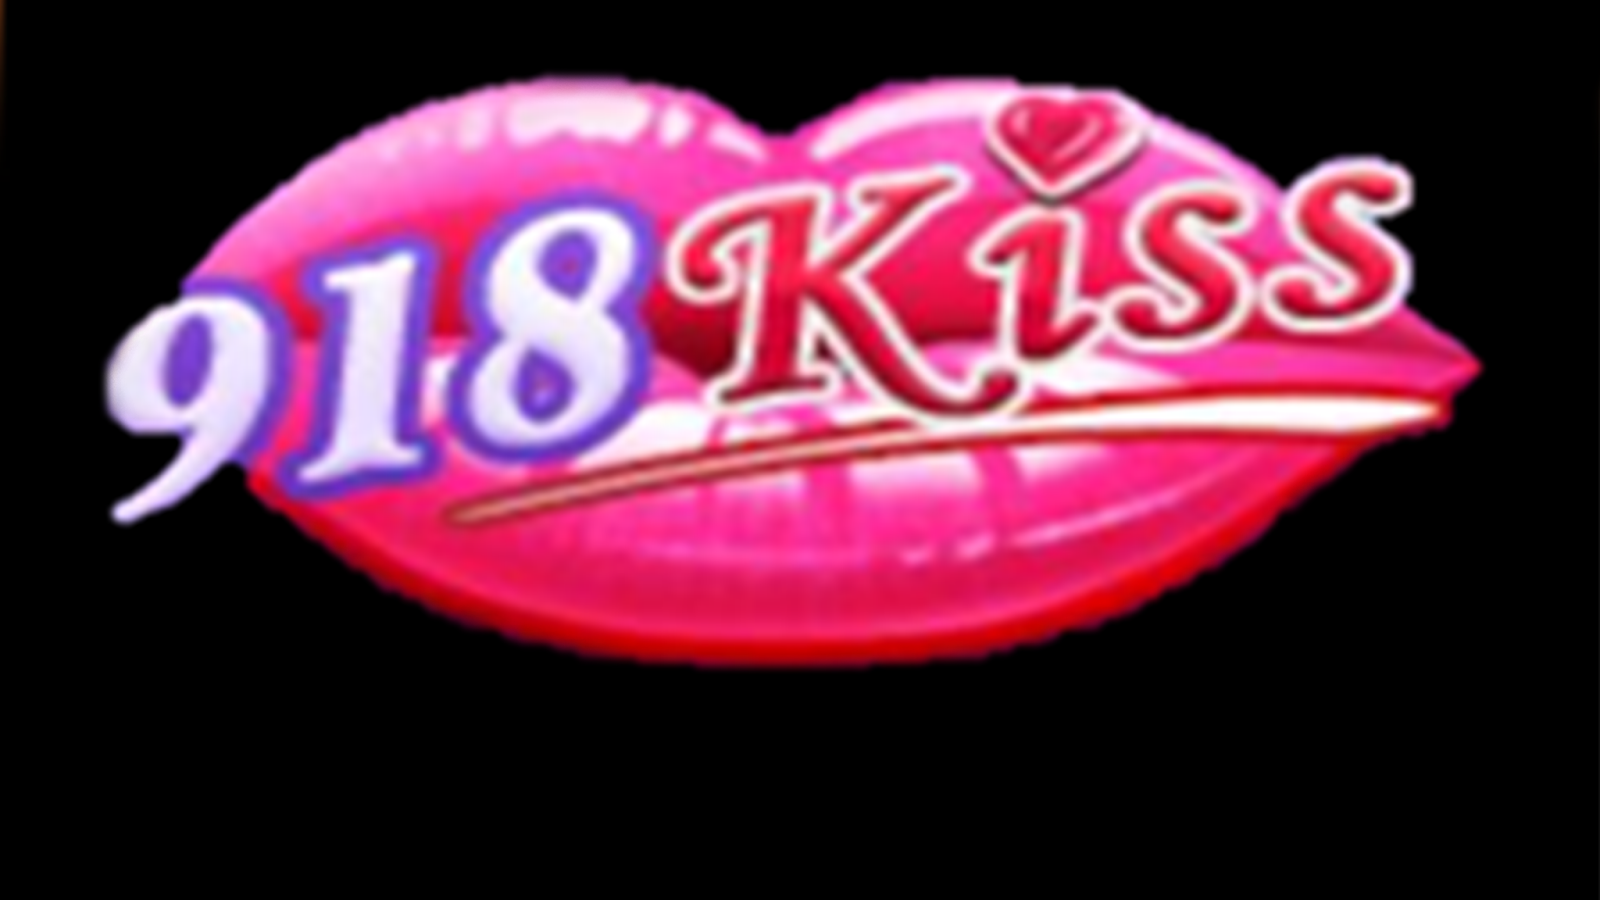 download logo 918kiss.png @btgame \/ 918kiss-Thailand Official